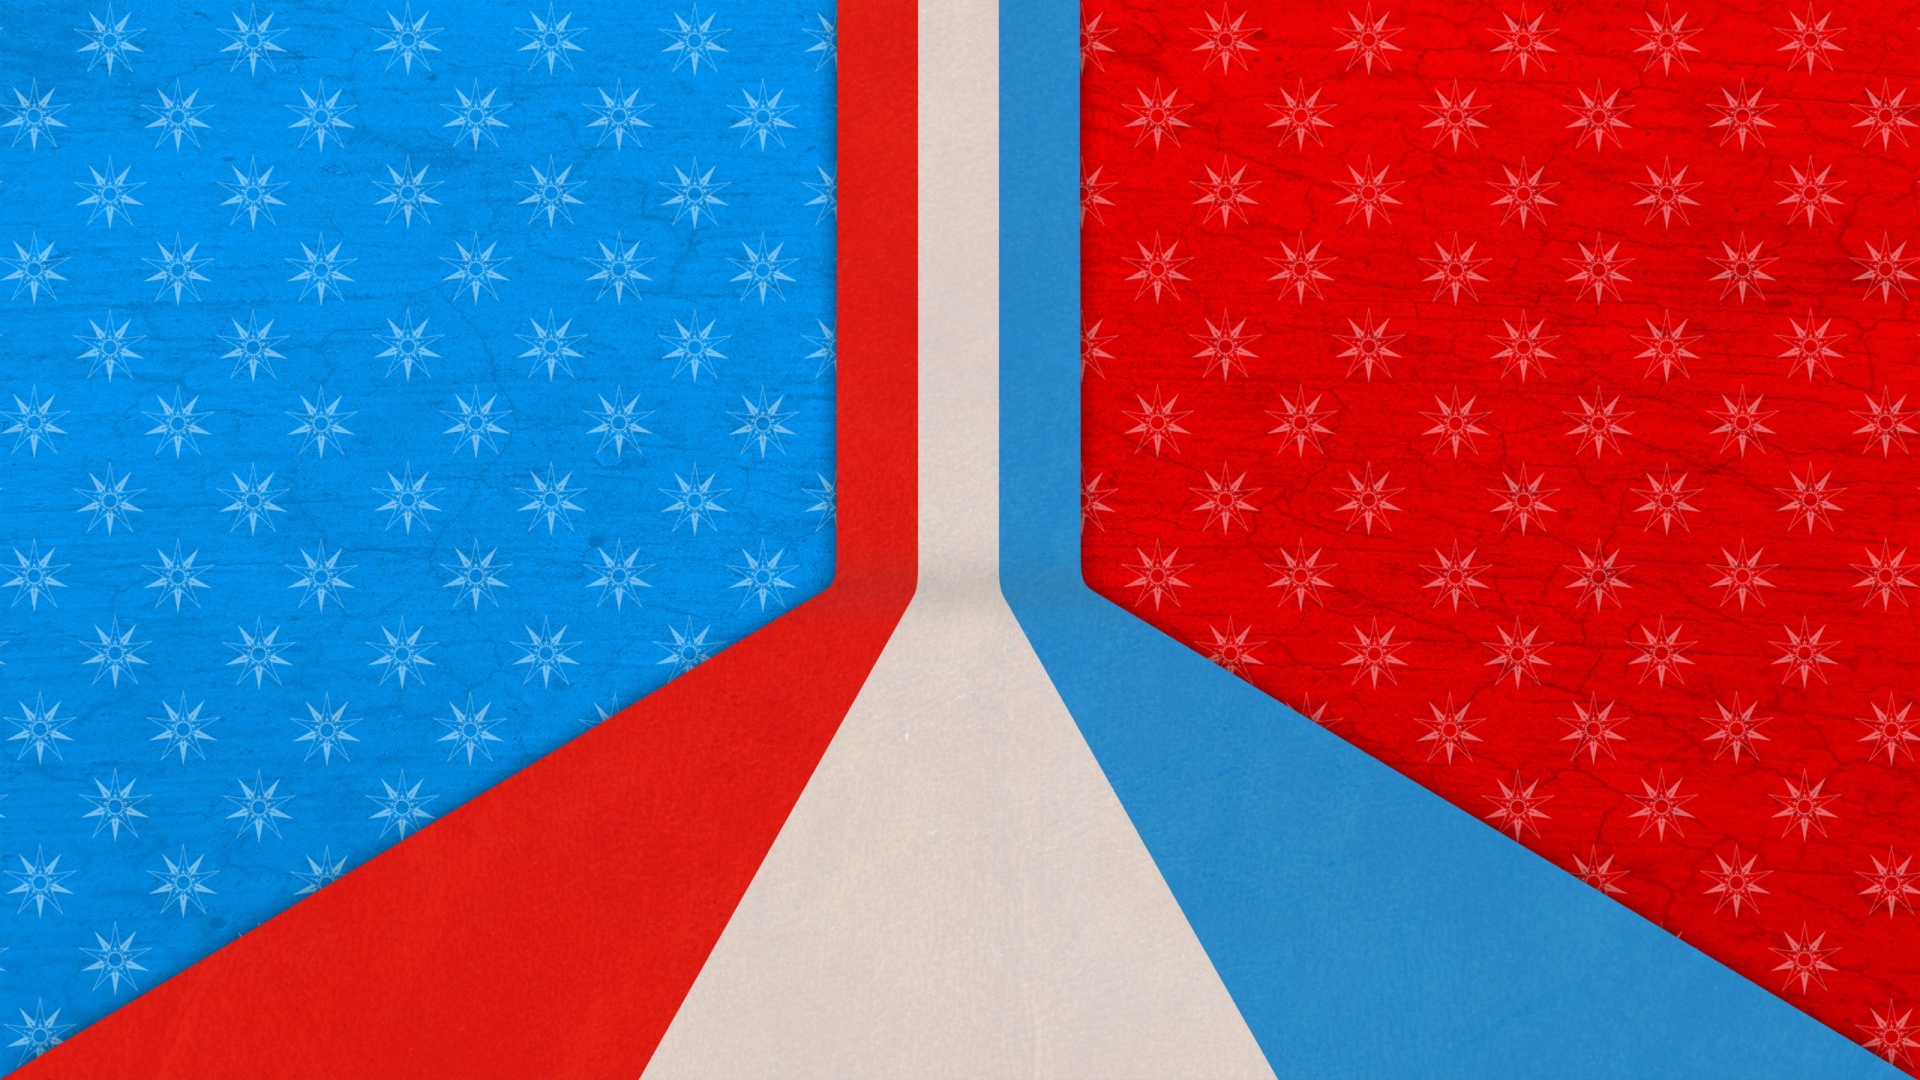 Abstract Wallpaper Blue Red White